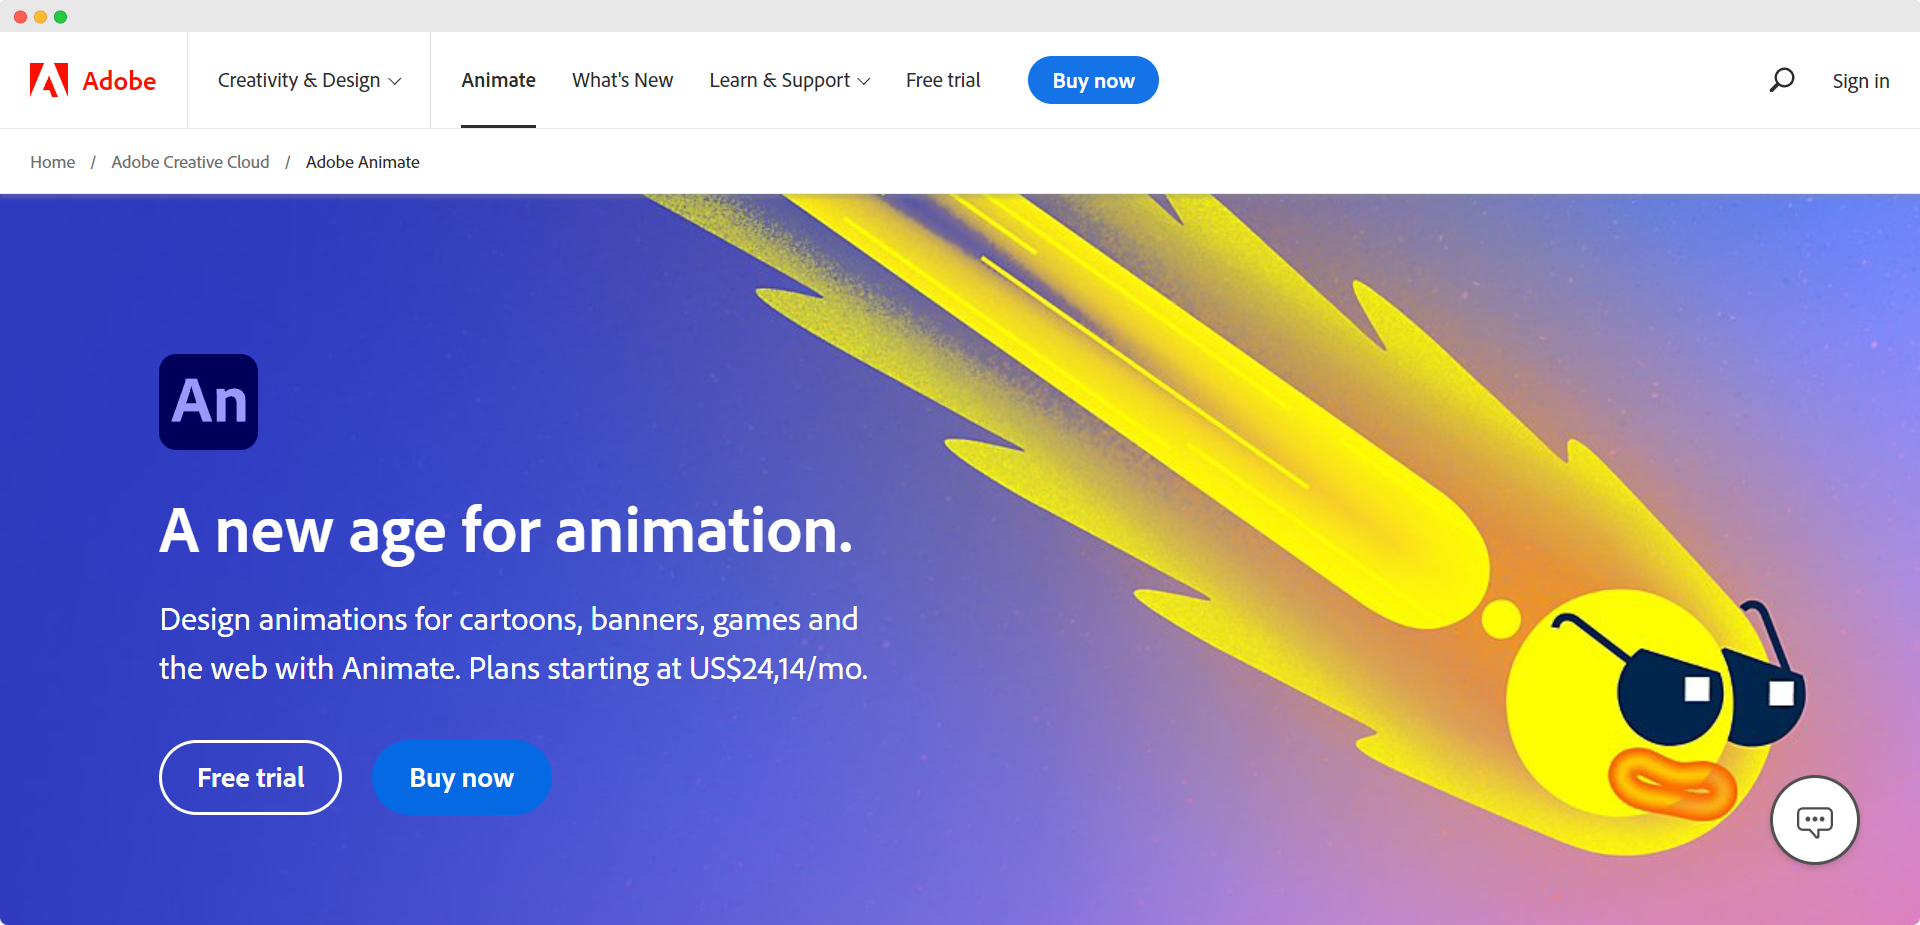 Top 58 Premium and Free Animation Software [Complete List]